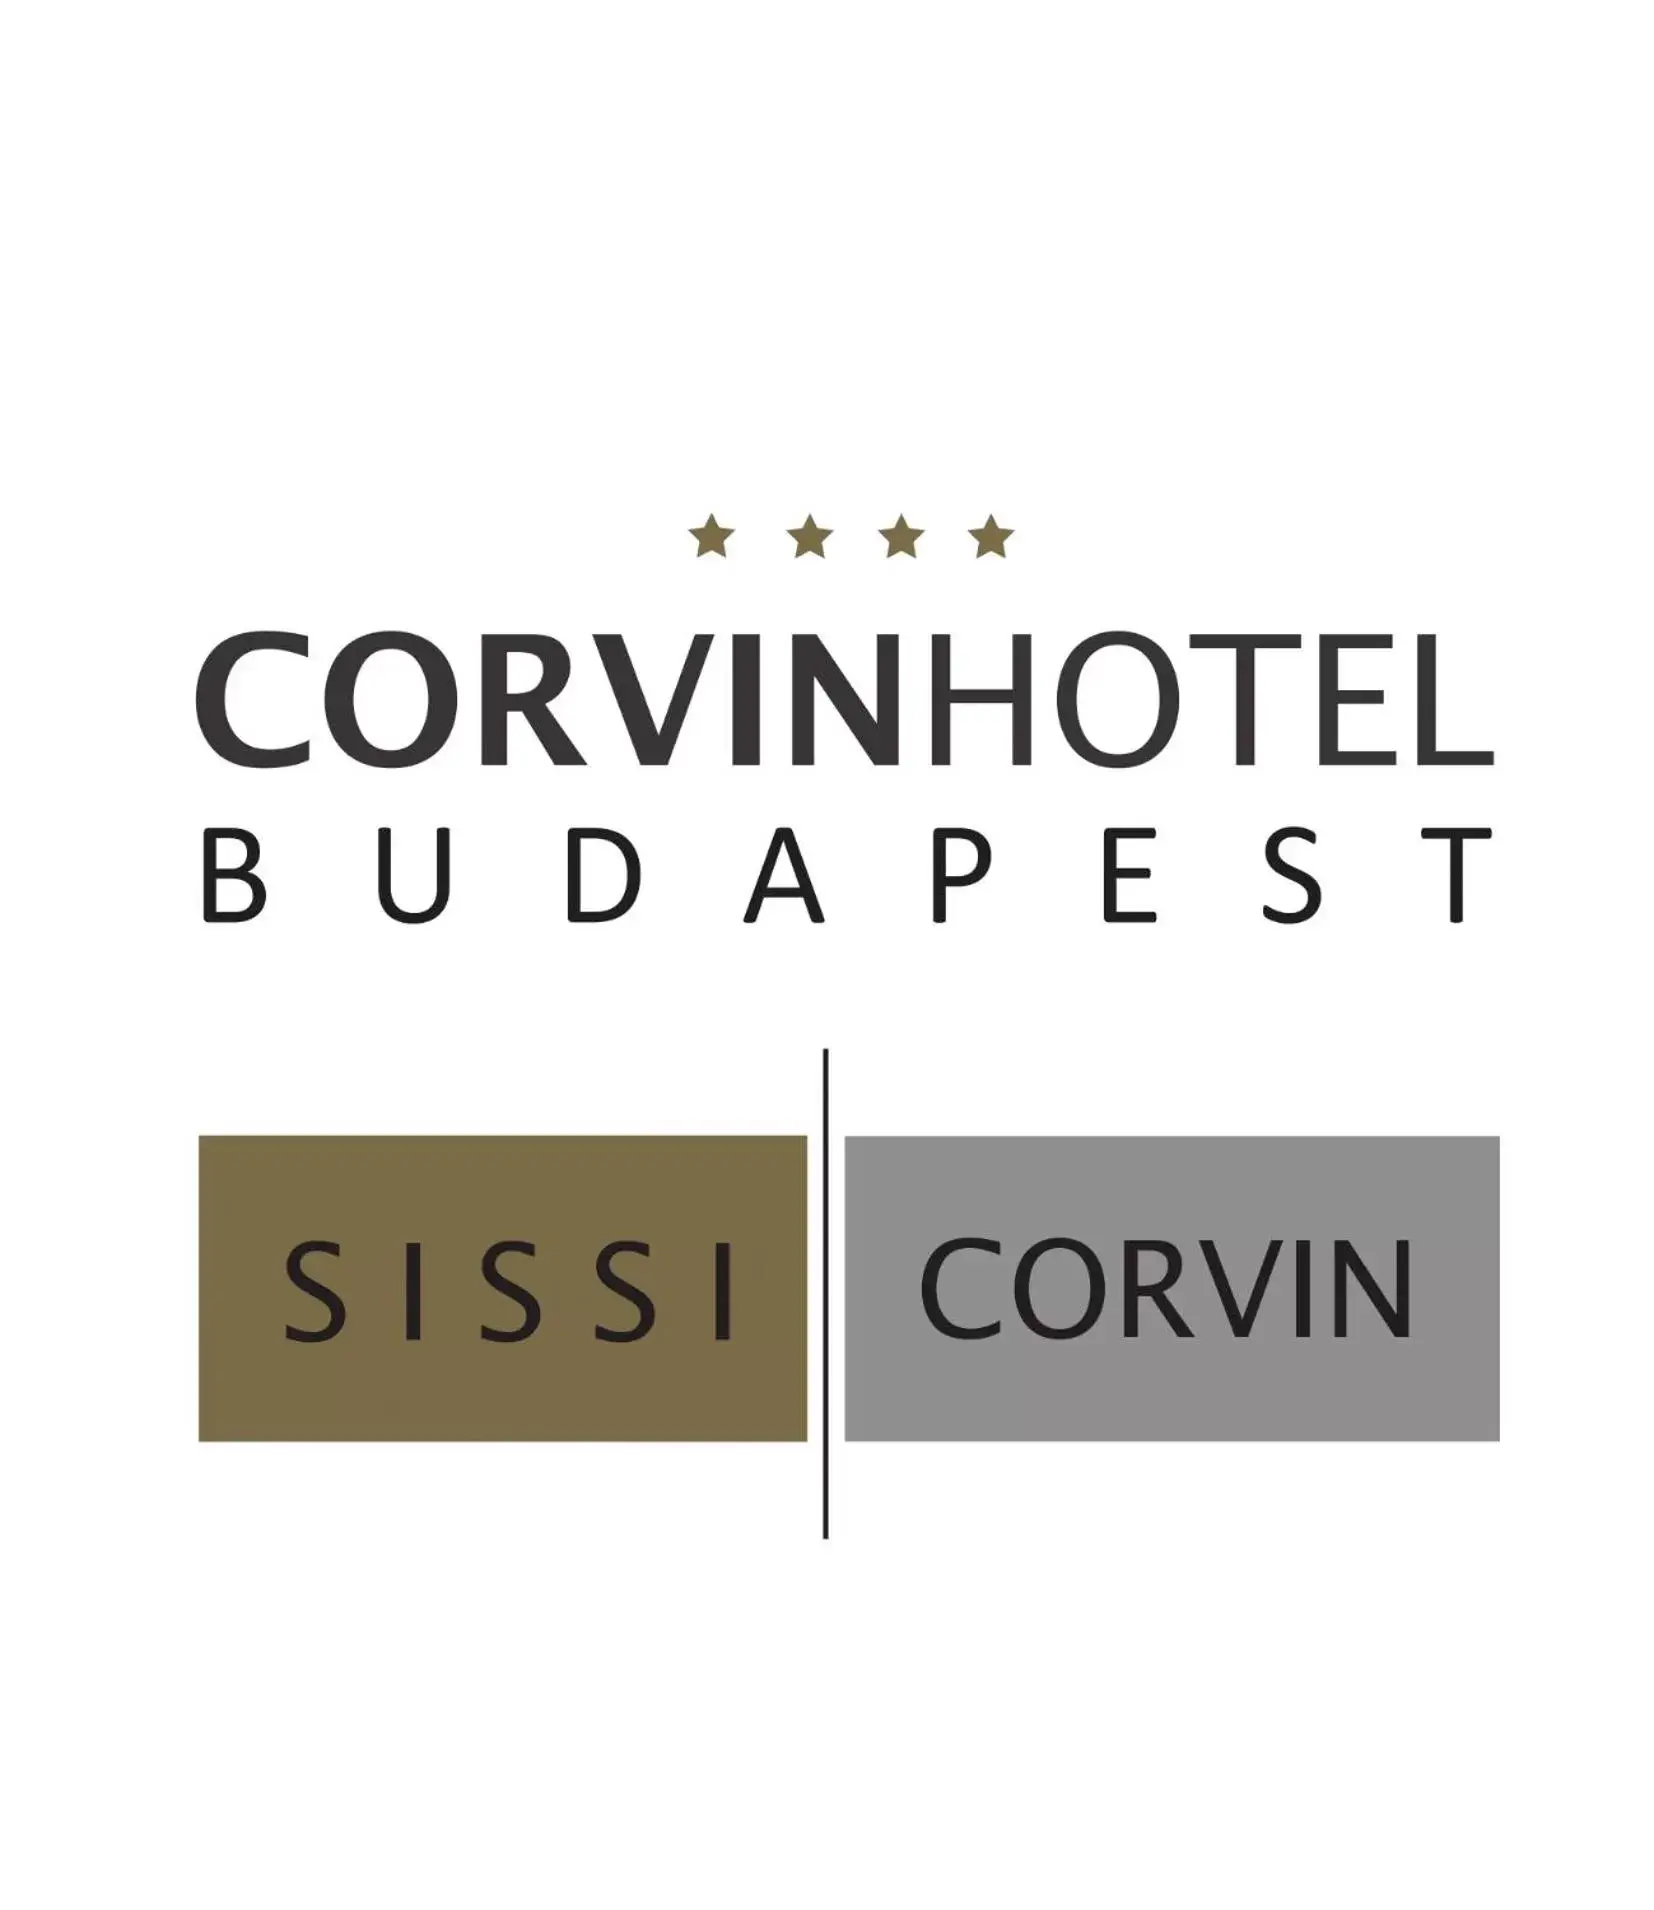 Property logo or sign, Logo/Certificate/Sign/Award in Corvin Hotel Budapest Corvin Wing